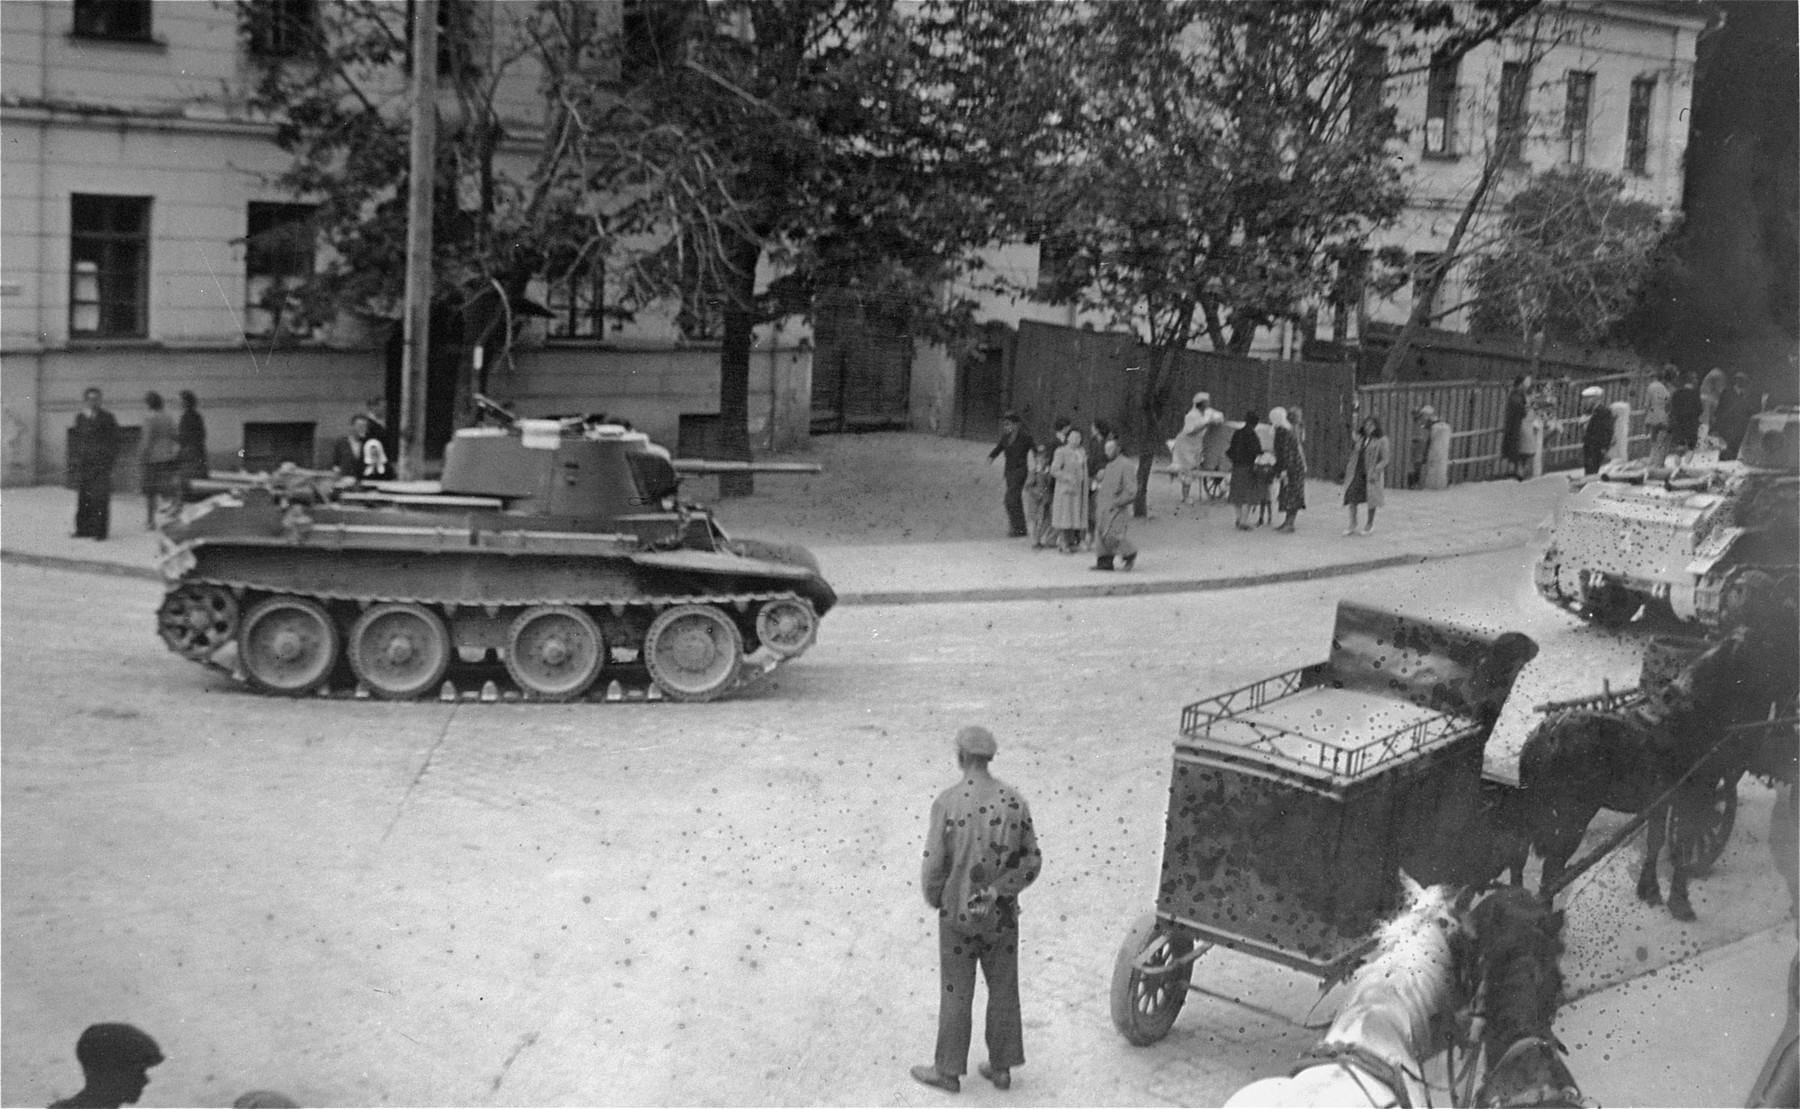 Russian tanks roll through the streets of Kaunas during the Soviet occupation of Lithuania.  

This photo was taken through a hole in a piece of paper that was used to cover a window.